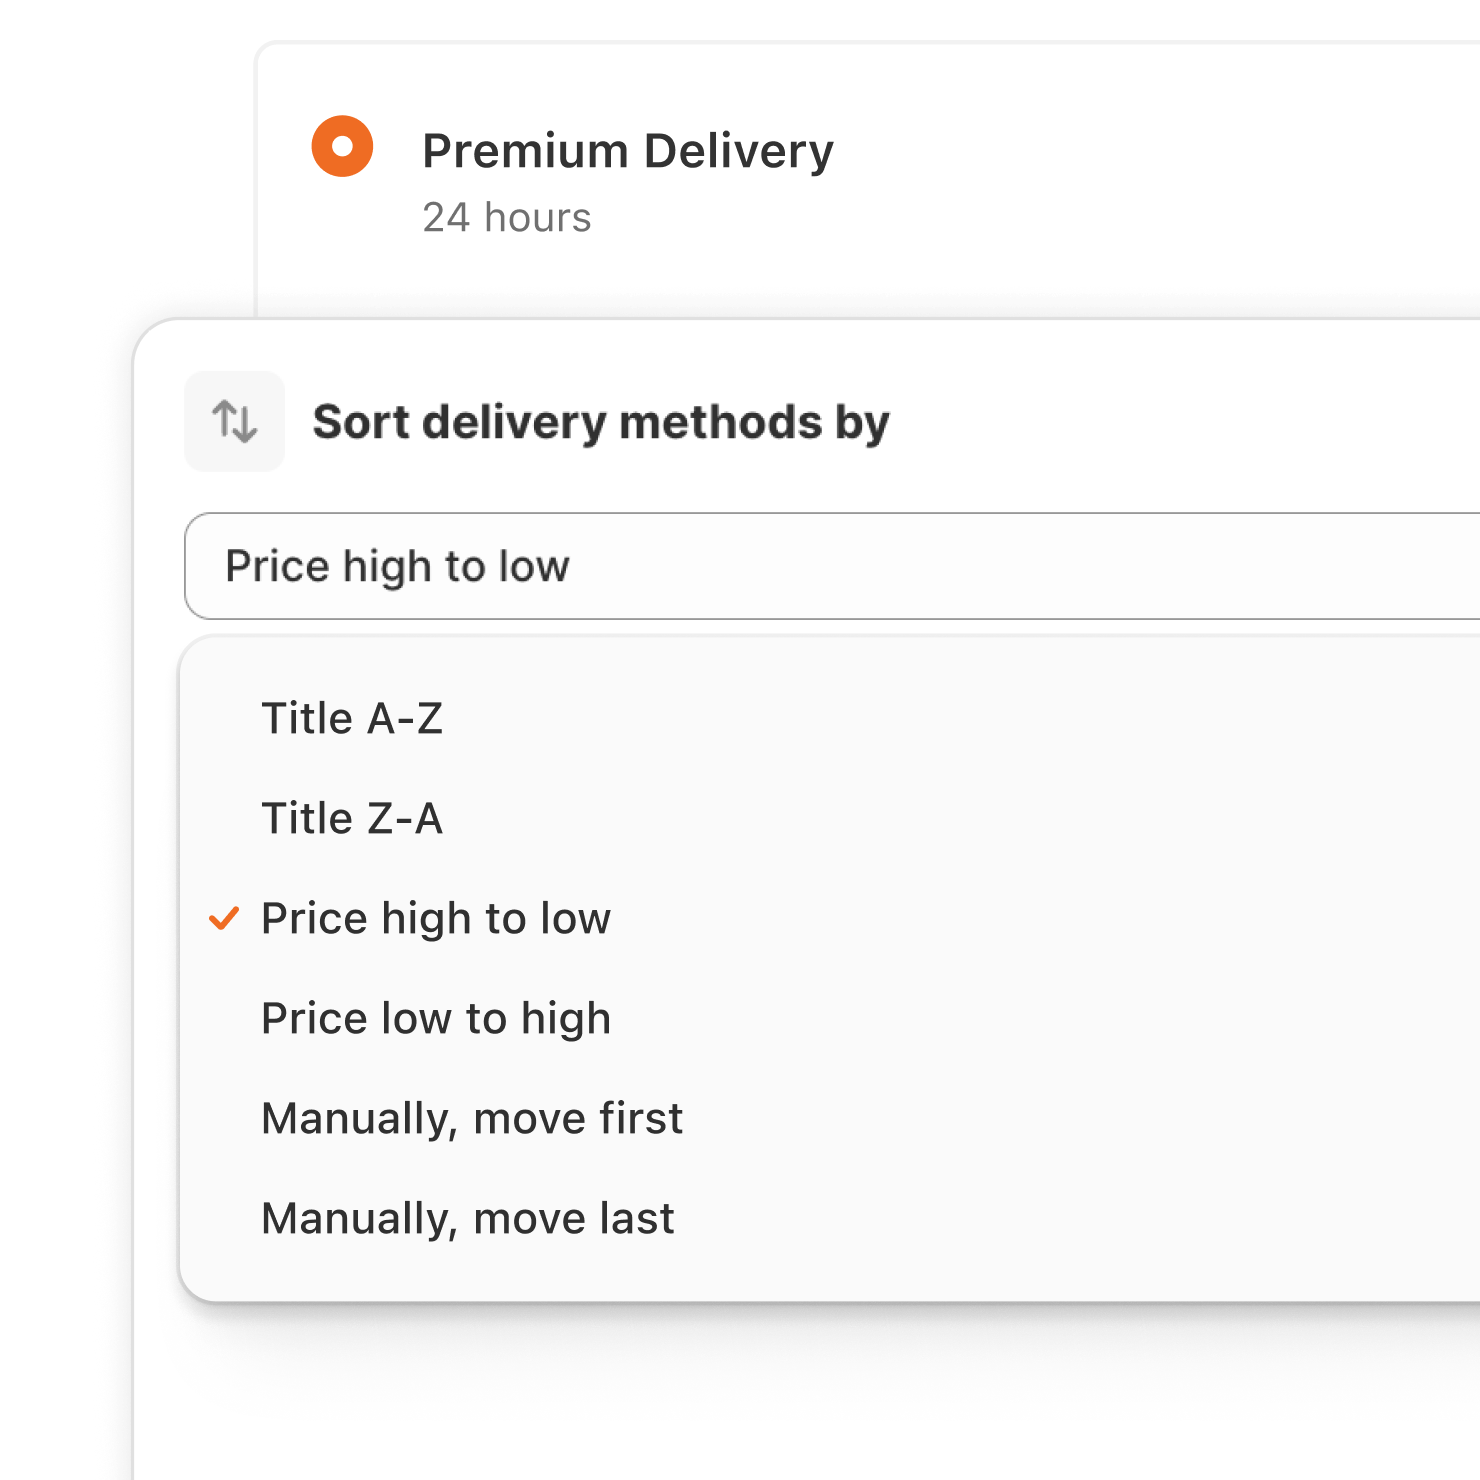 Reorder delivery methods image